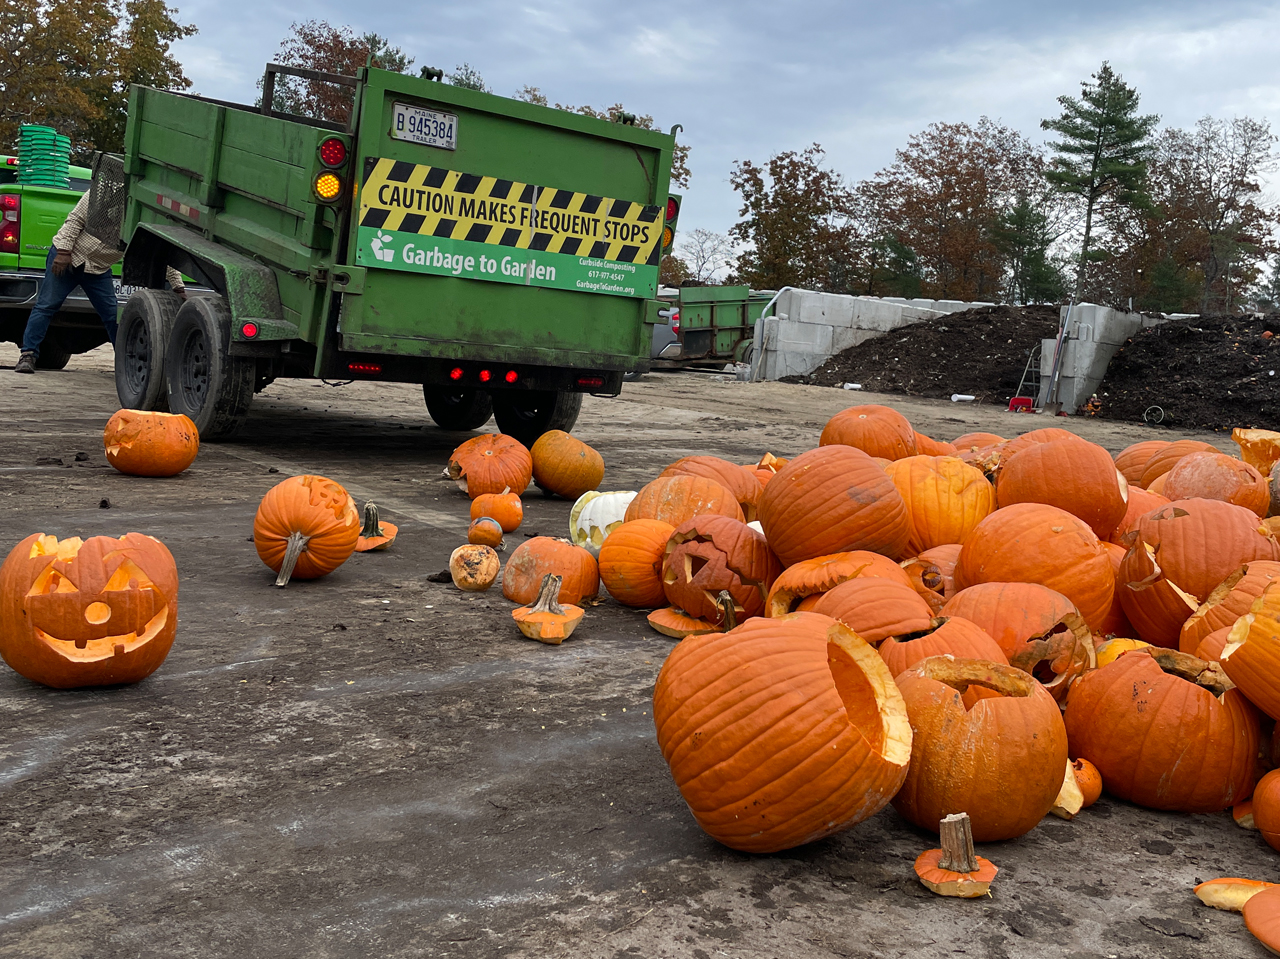 Pumpkins for composting with Garbage to Garden